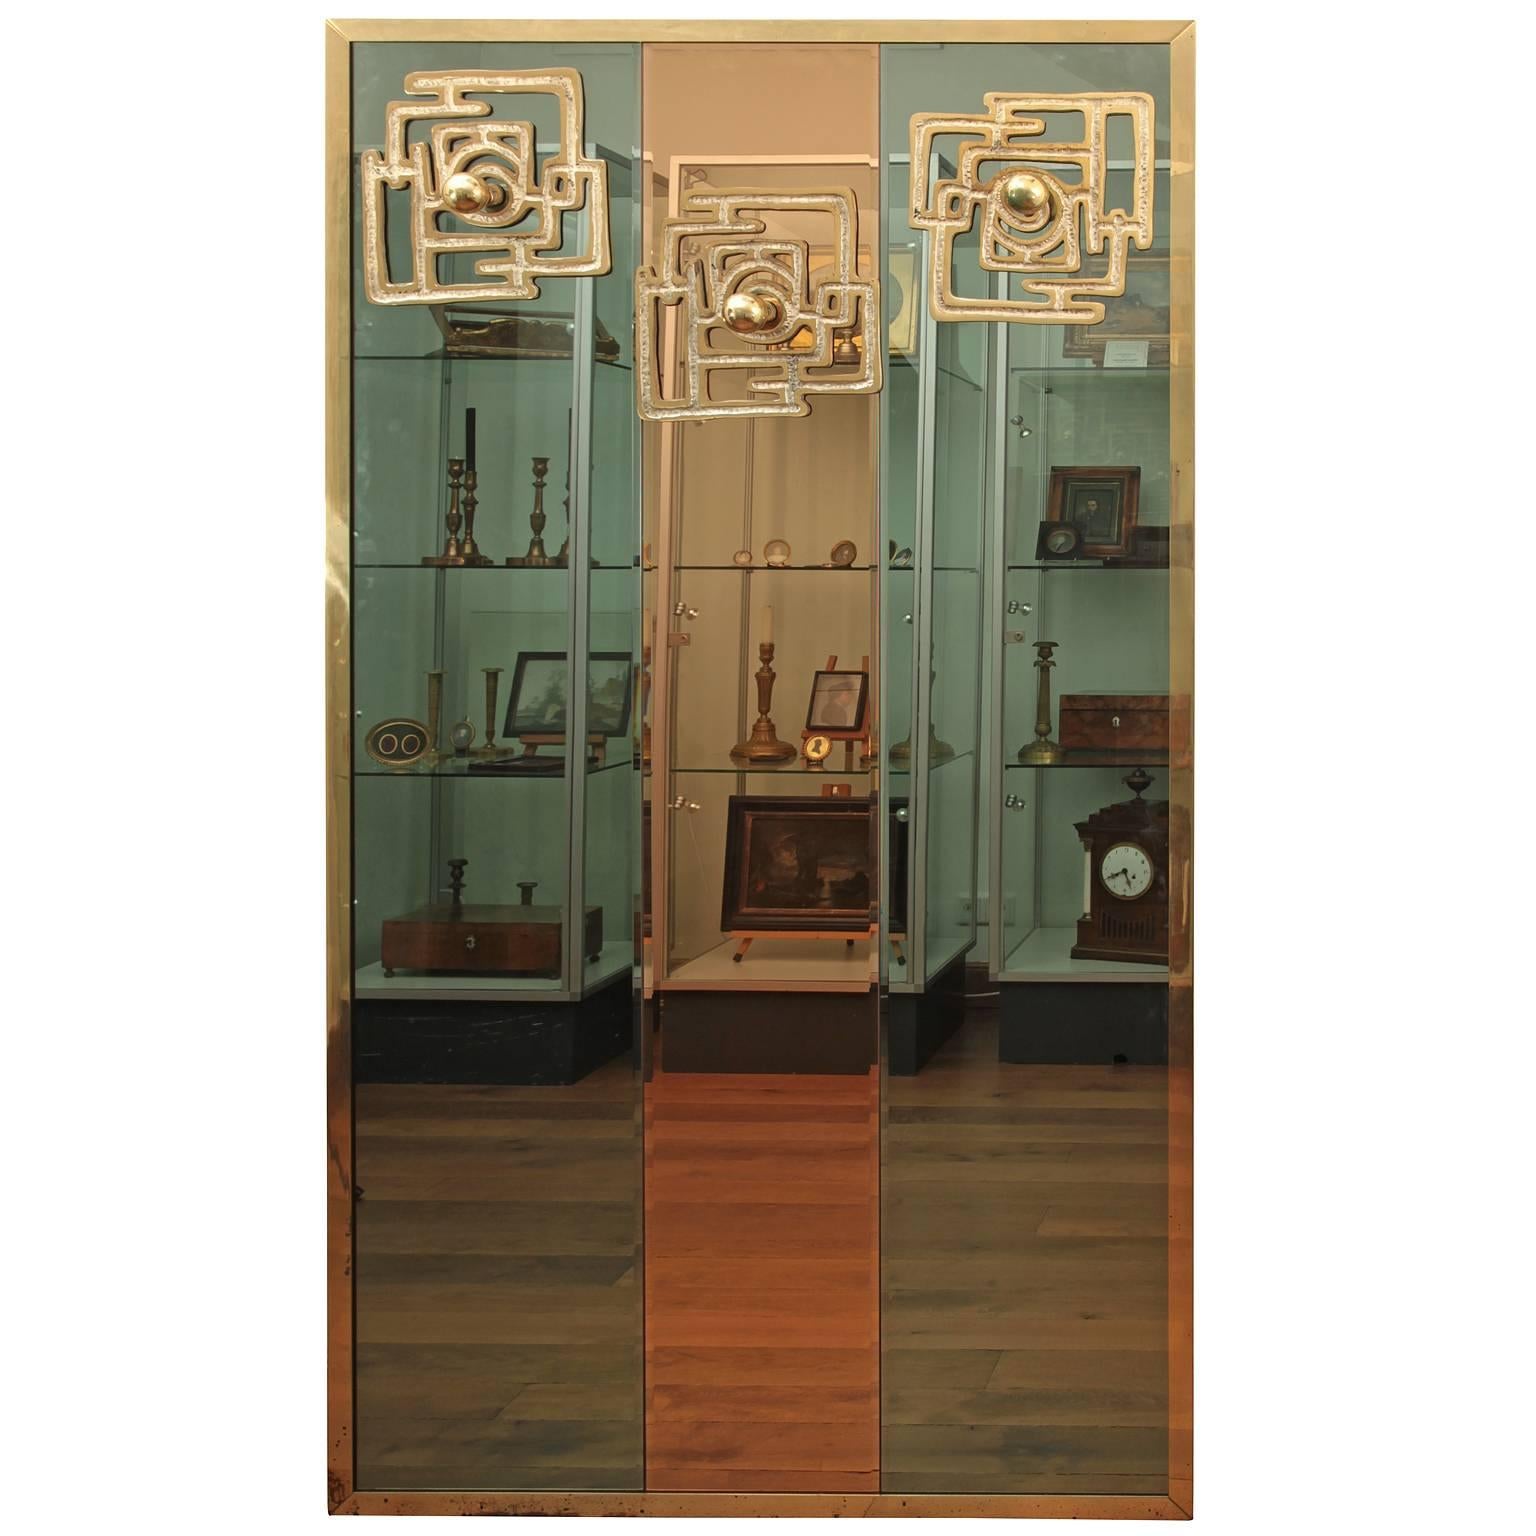 Large rectangular coat rack by the Italian artist Luciano Frigerio. The back consists of three mirror panes in different hues. At the top part of the mirror are bronze appliqués as coat hangers, designed in the typical style of Frigerio.